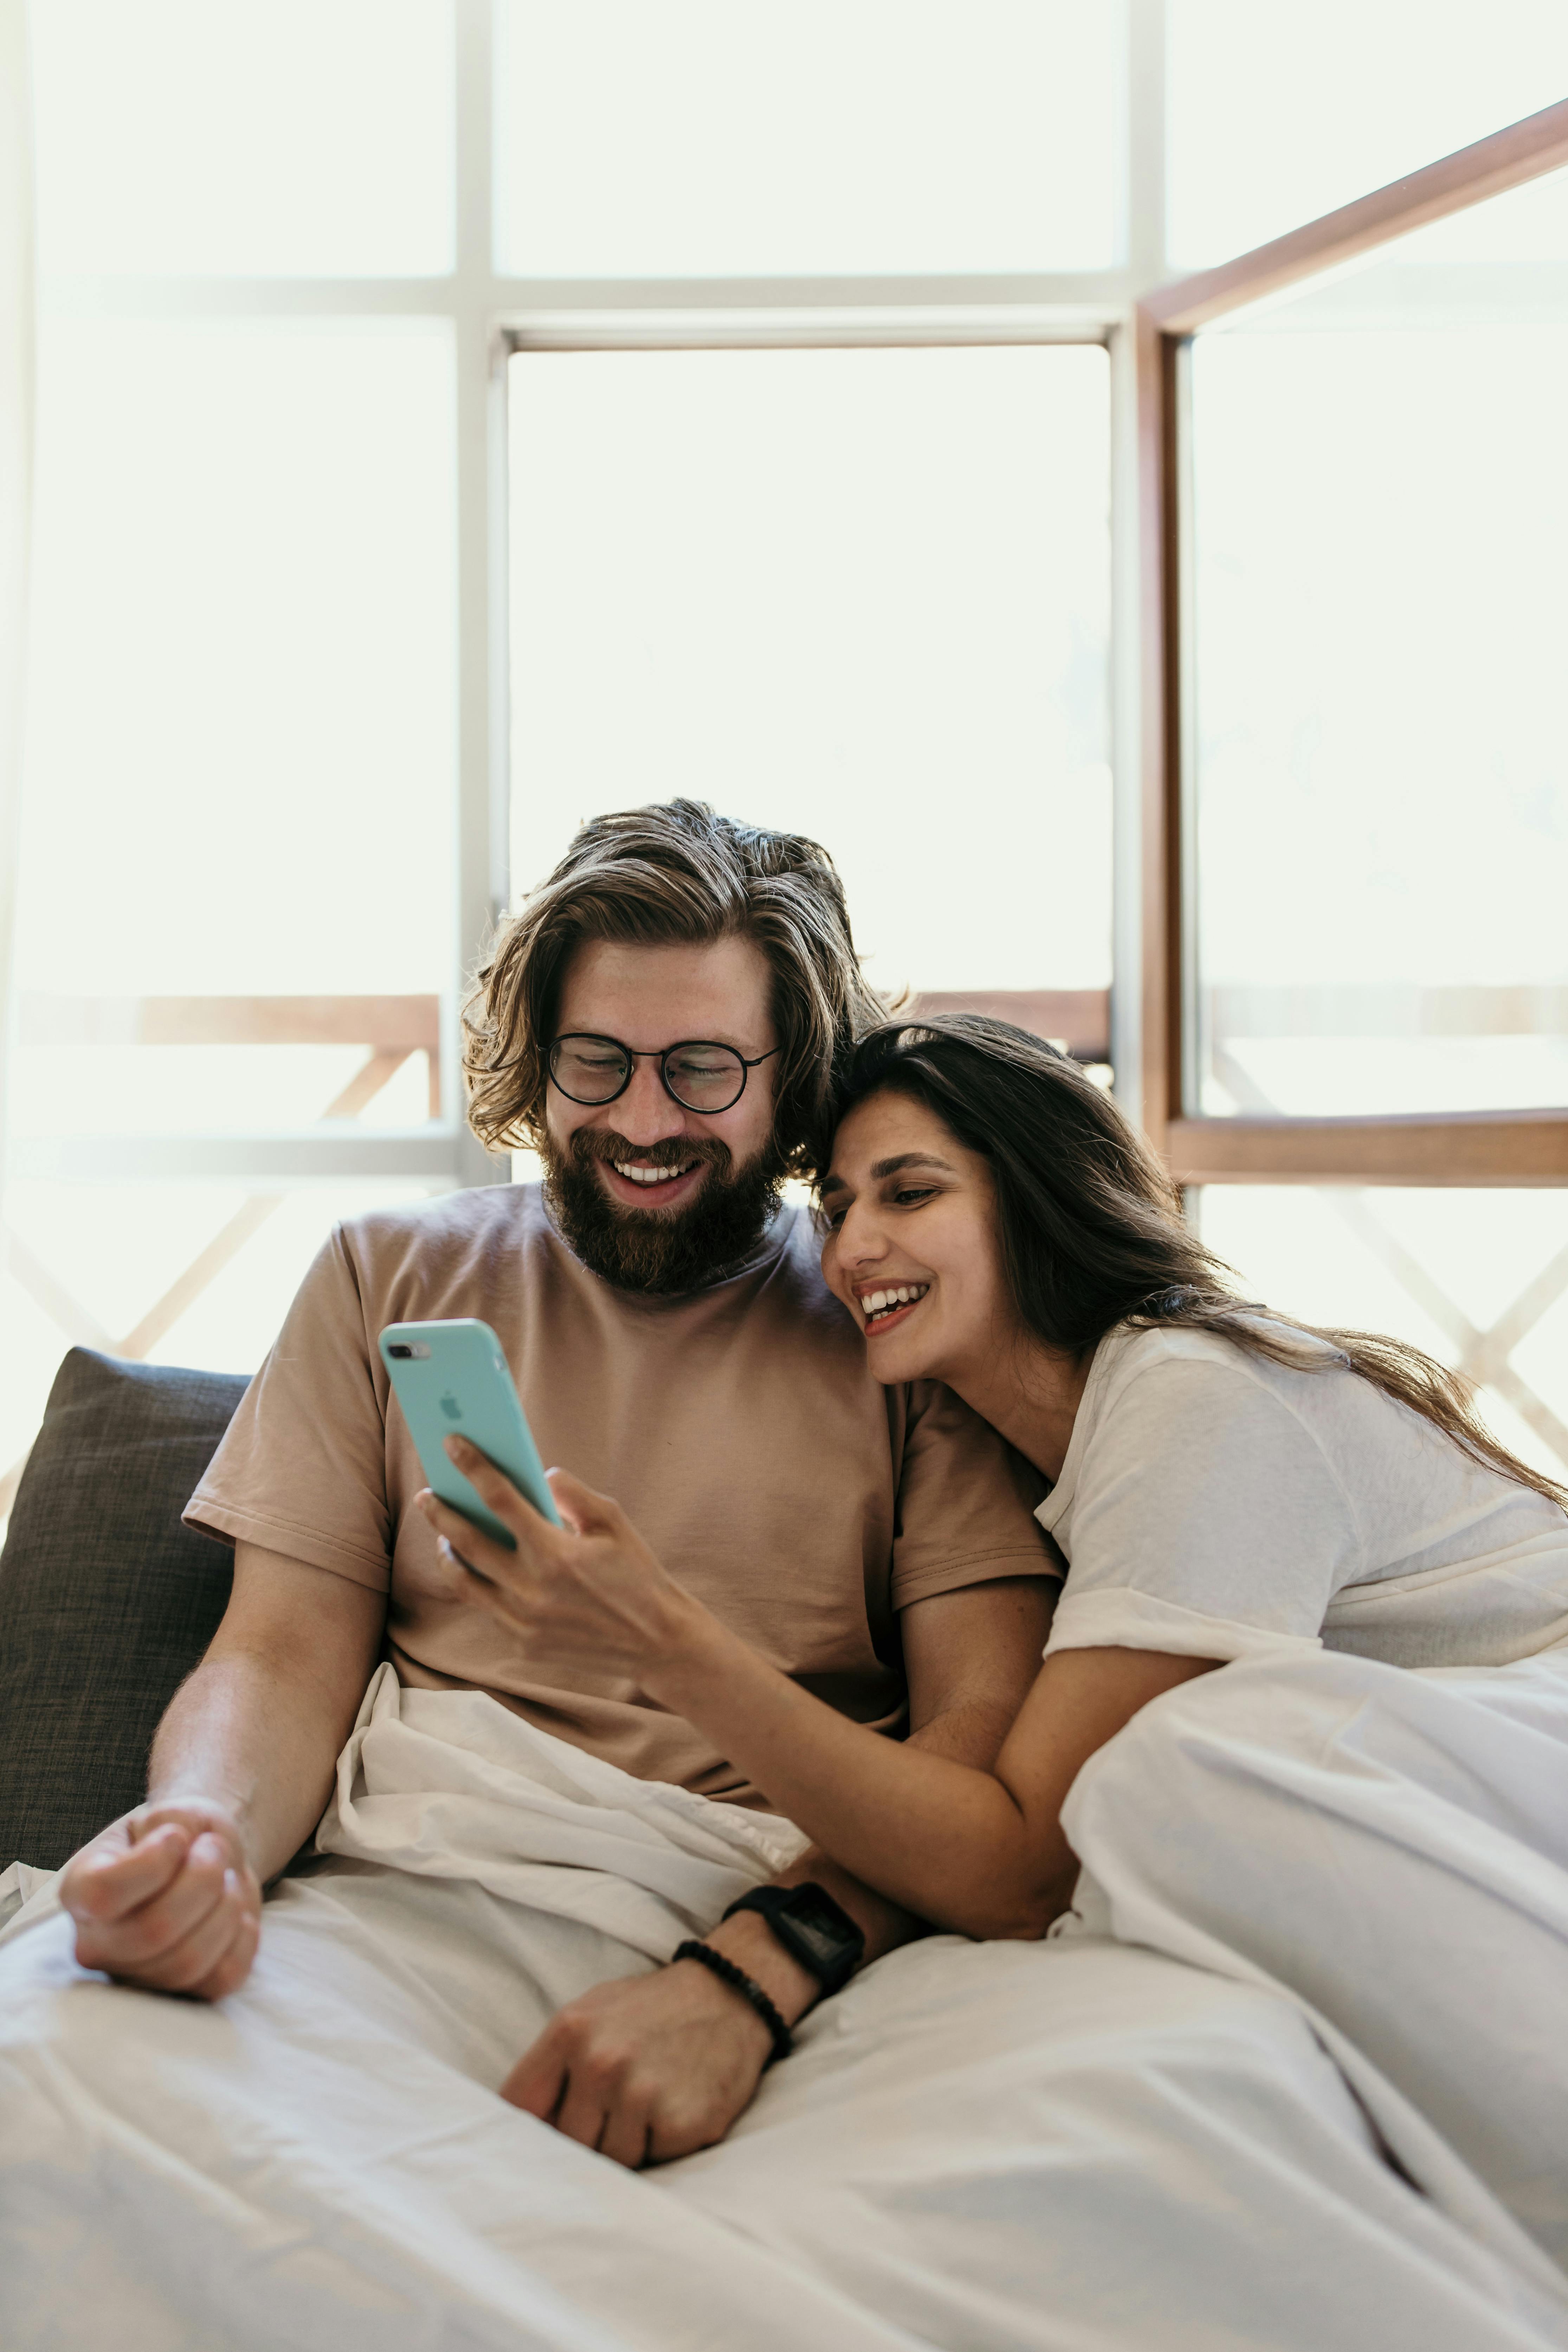 Couple in bed | Source: Pexels